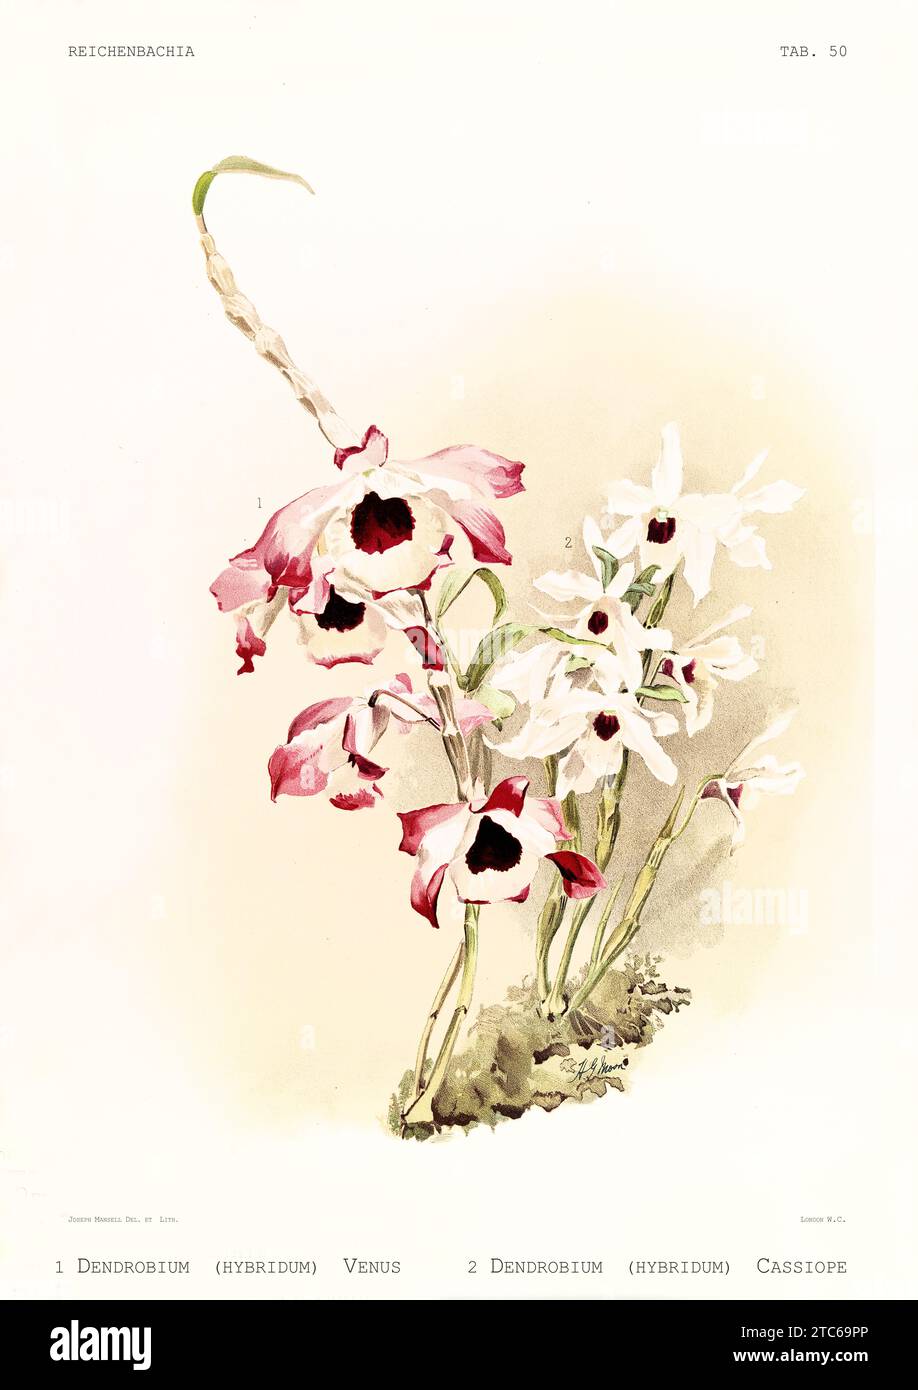 Old illustration of  Dendrobium venus and Dendrobium cassiope. Reichenbachia, by F. Sander. St. Albans, UK, 1888 - 1894 Stock Photo